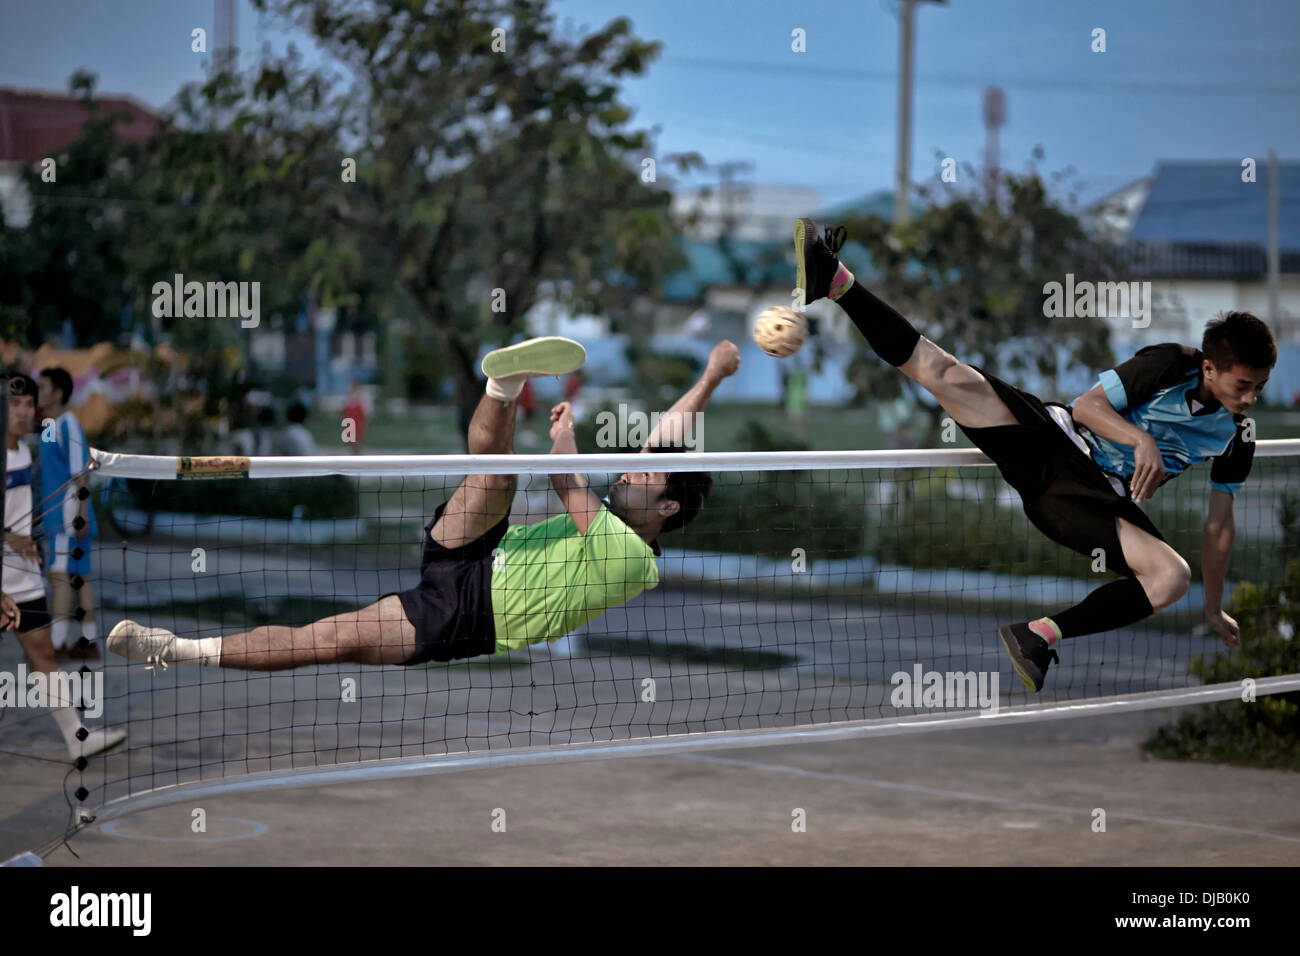 Extreme athleticism during a game of Sepak Takraw. Traditional and popular Thai football game. Thailand S. E. Asia Stock Photo